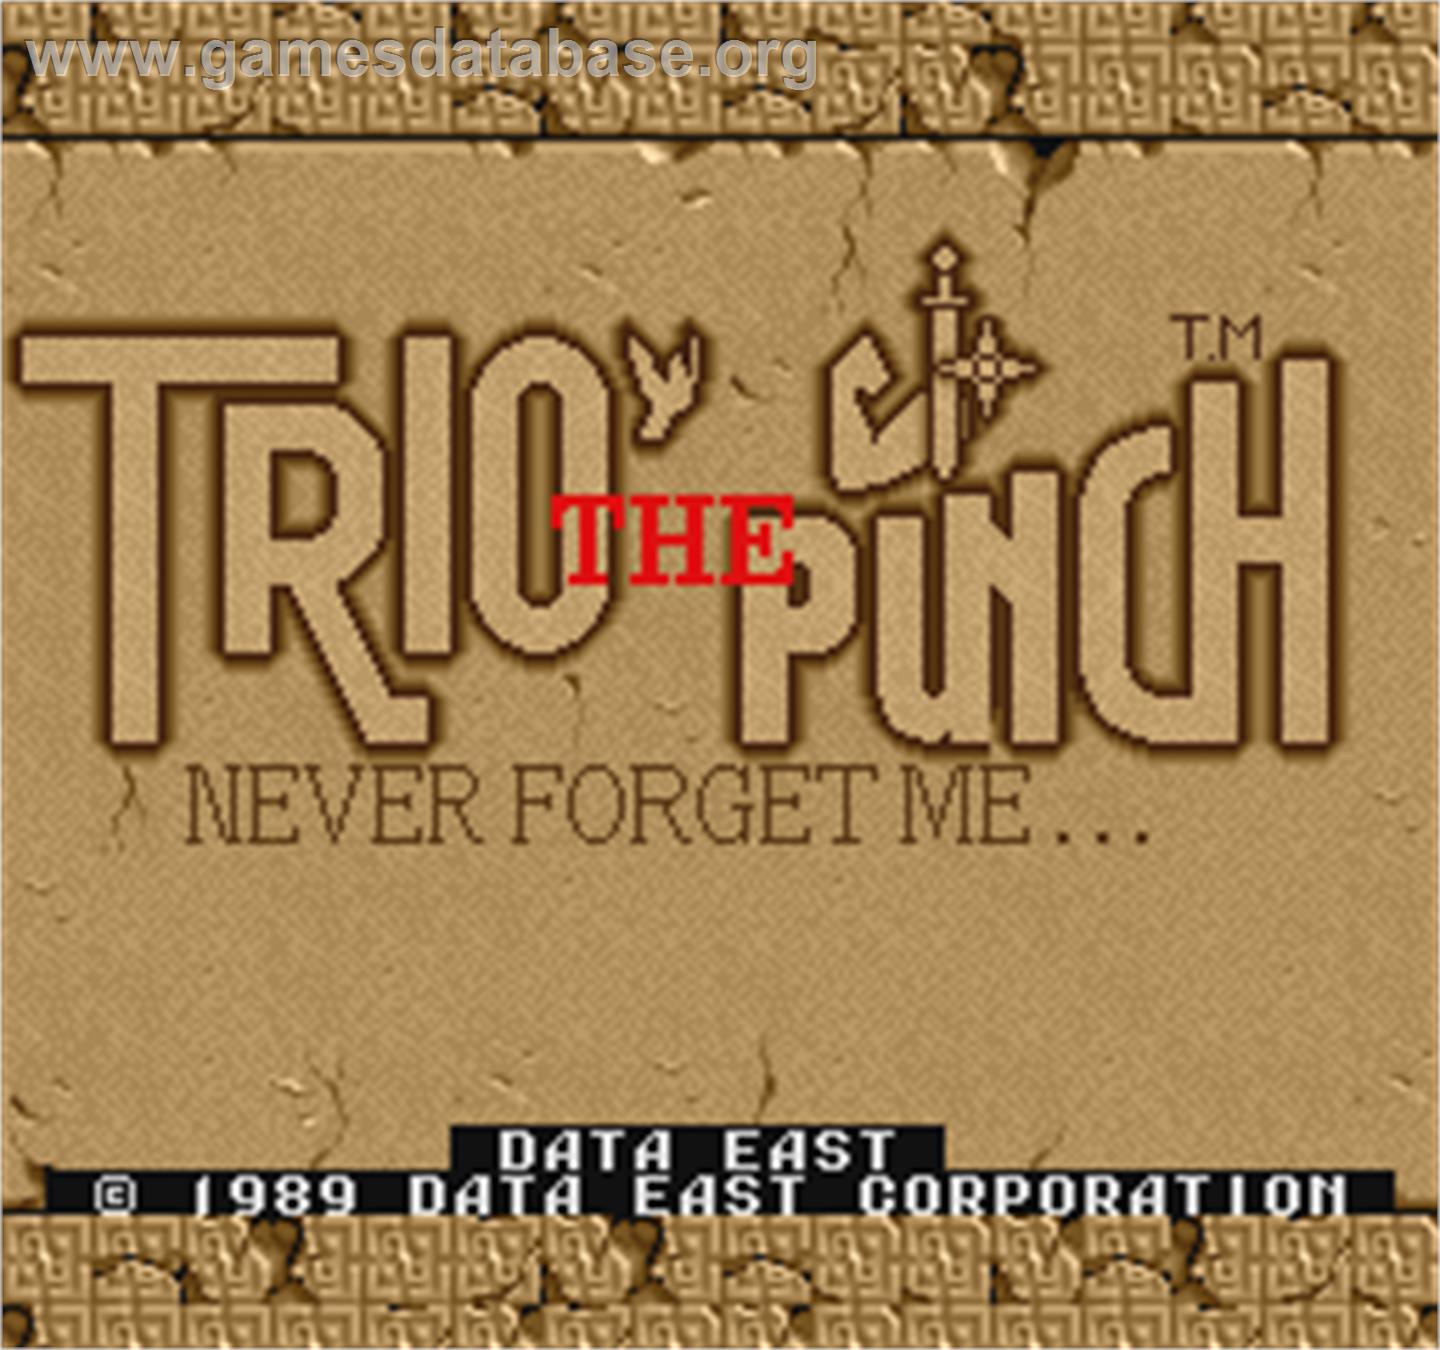 Trio The Punch - Never Forget Me... - Arcade - Artwork - Title Screen